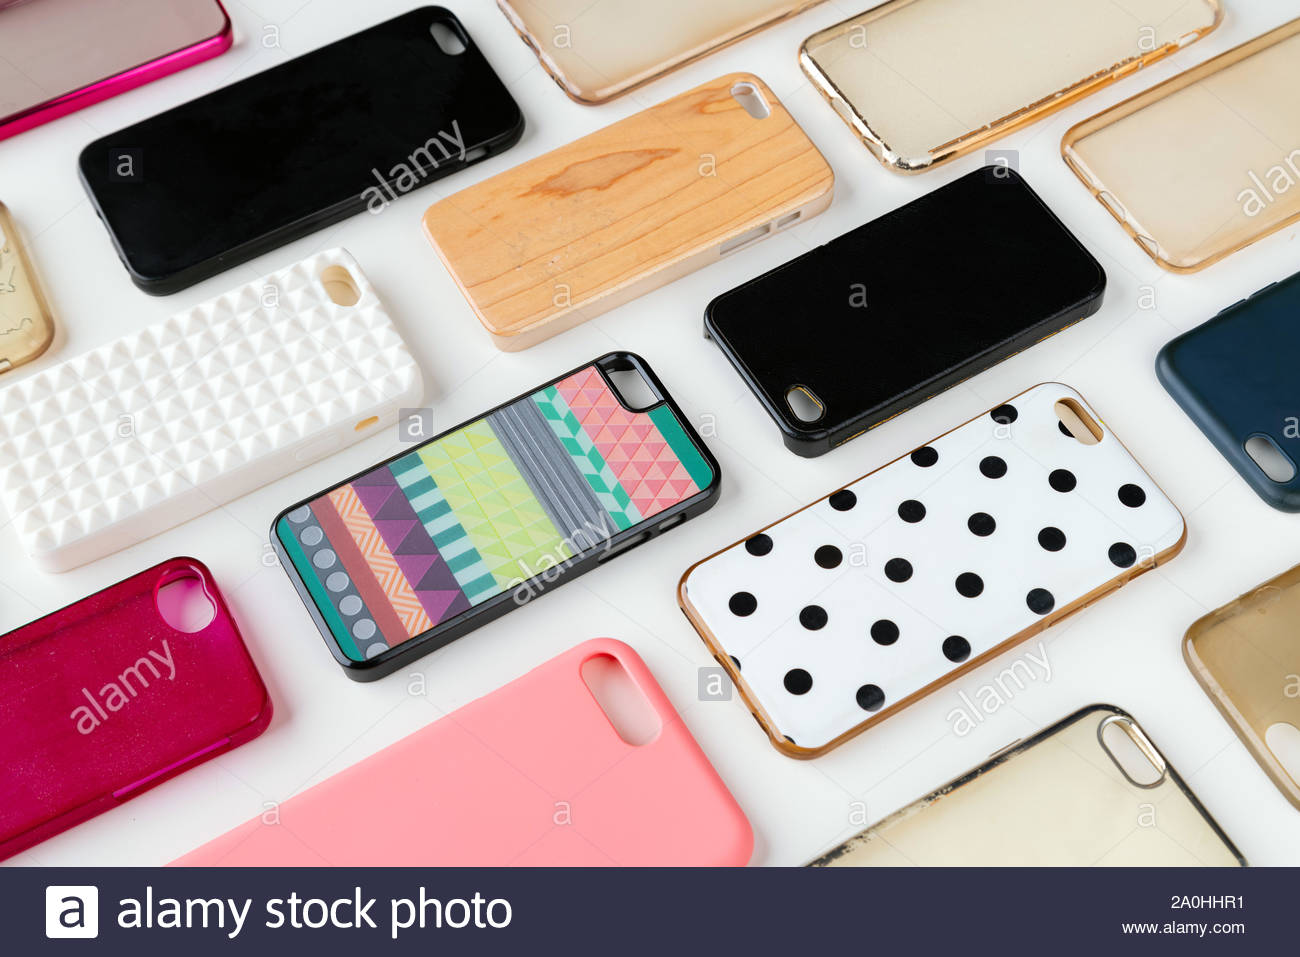 Pile Of Multicolored Plastic Back Covers For Mobile Phone Choice Of Smart Phone Protector Accessories Background A Lot Of Silicone Phone Backs Or Sk Stock Photo Alamy